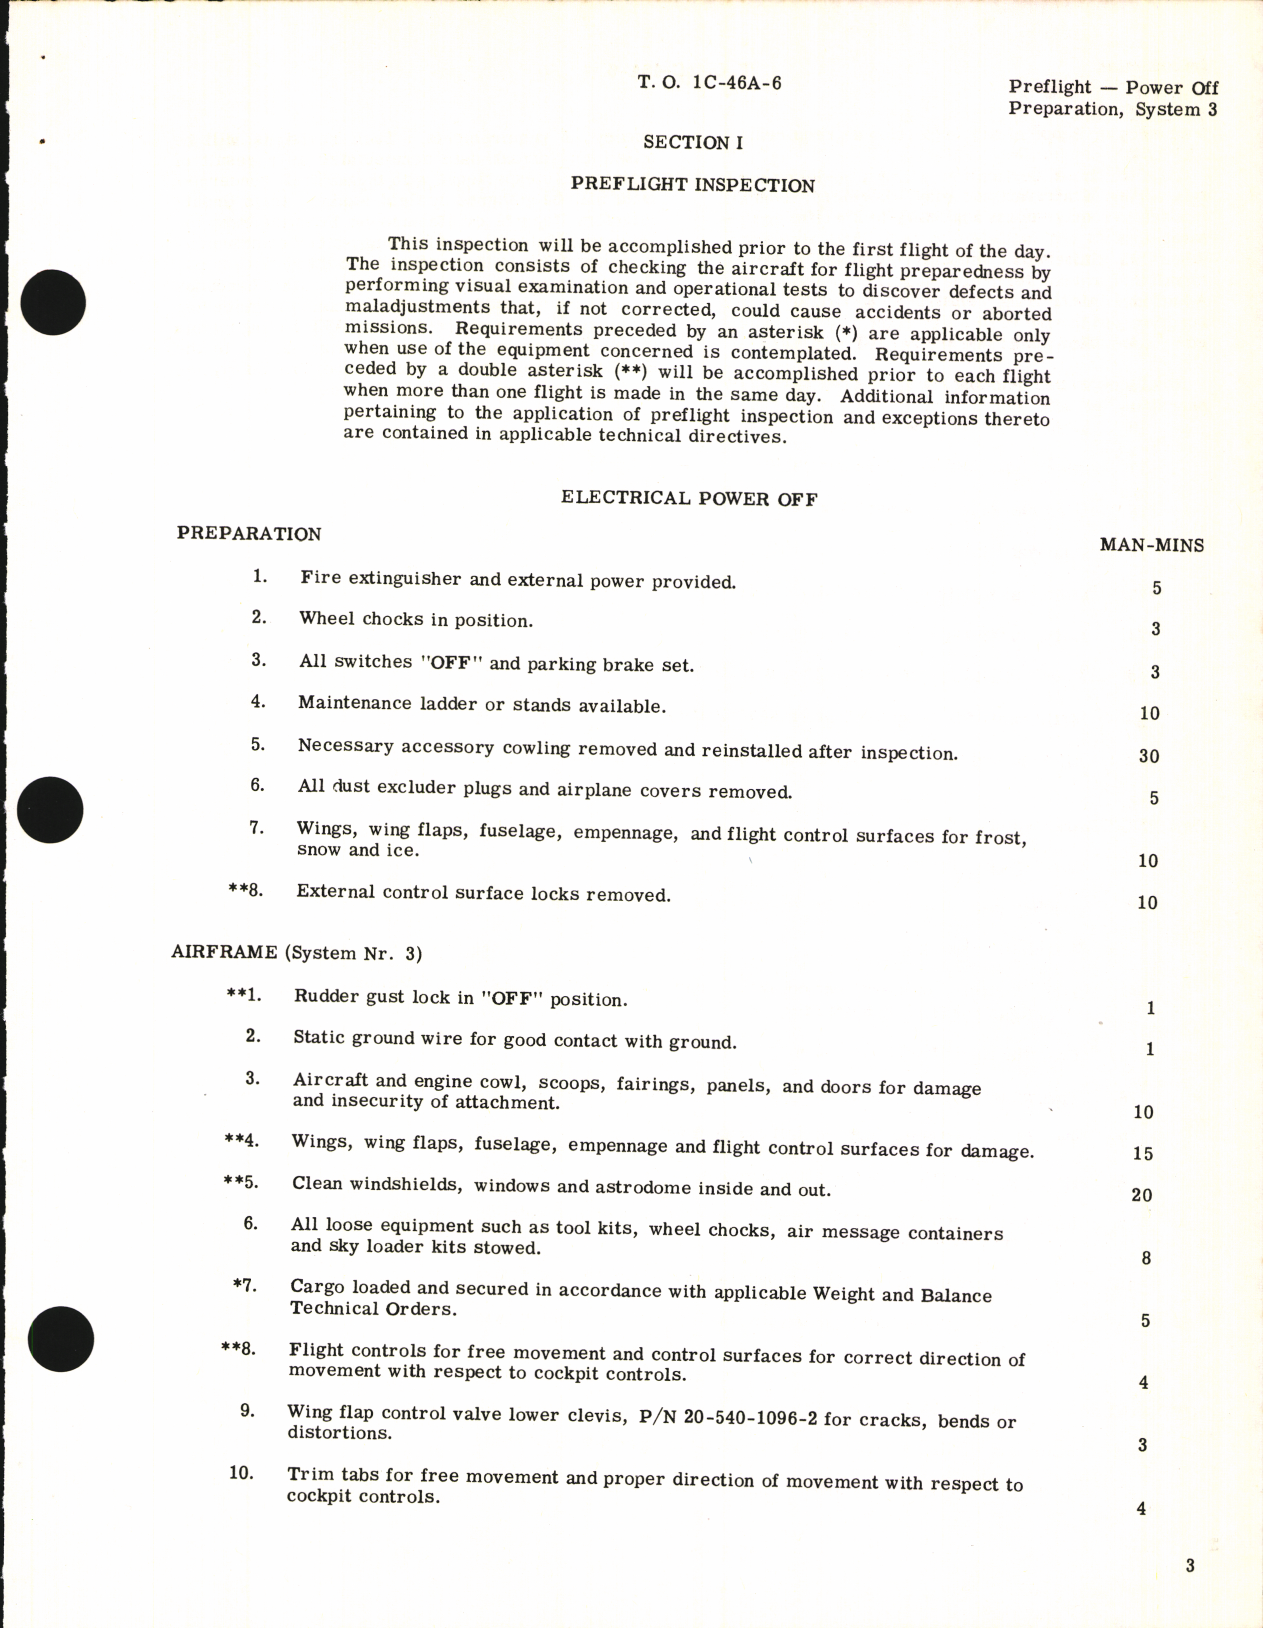 Sample page 5 from AirCorps Library document: Inspection Requirements for C-46A, C-46D, and C-46F Aircraft